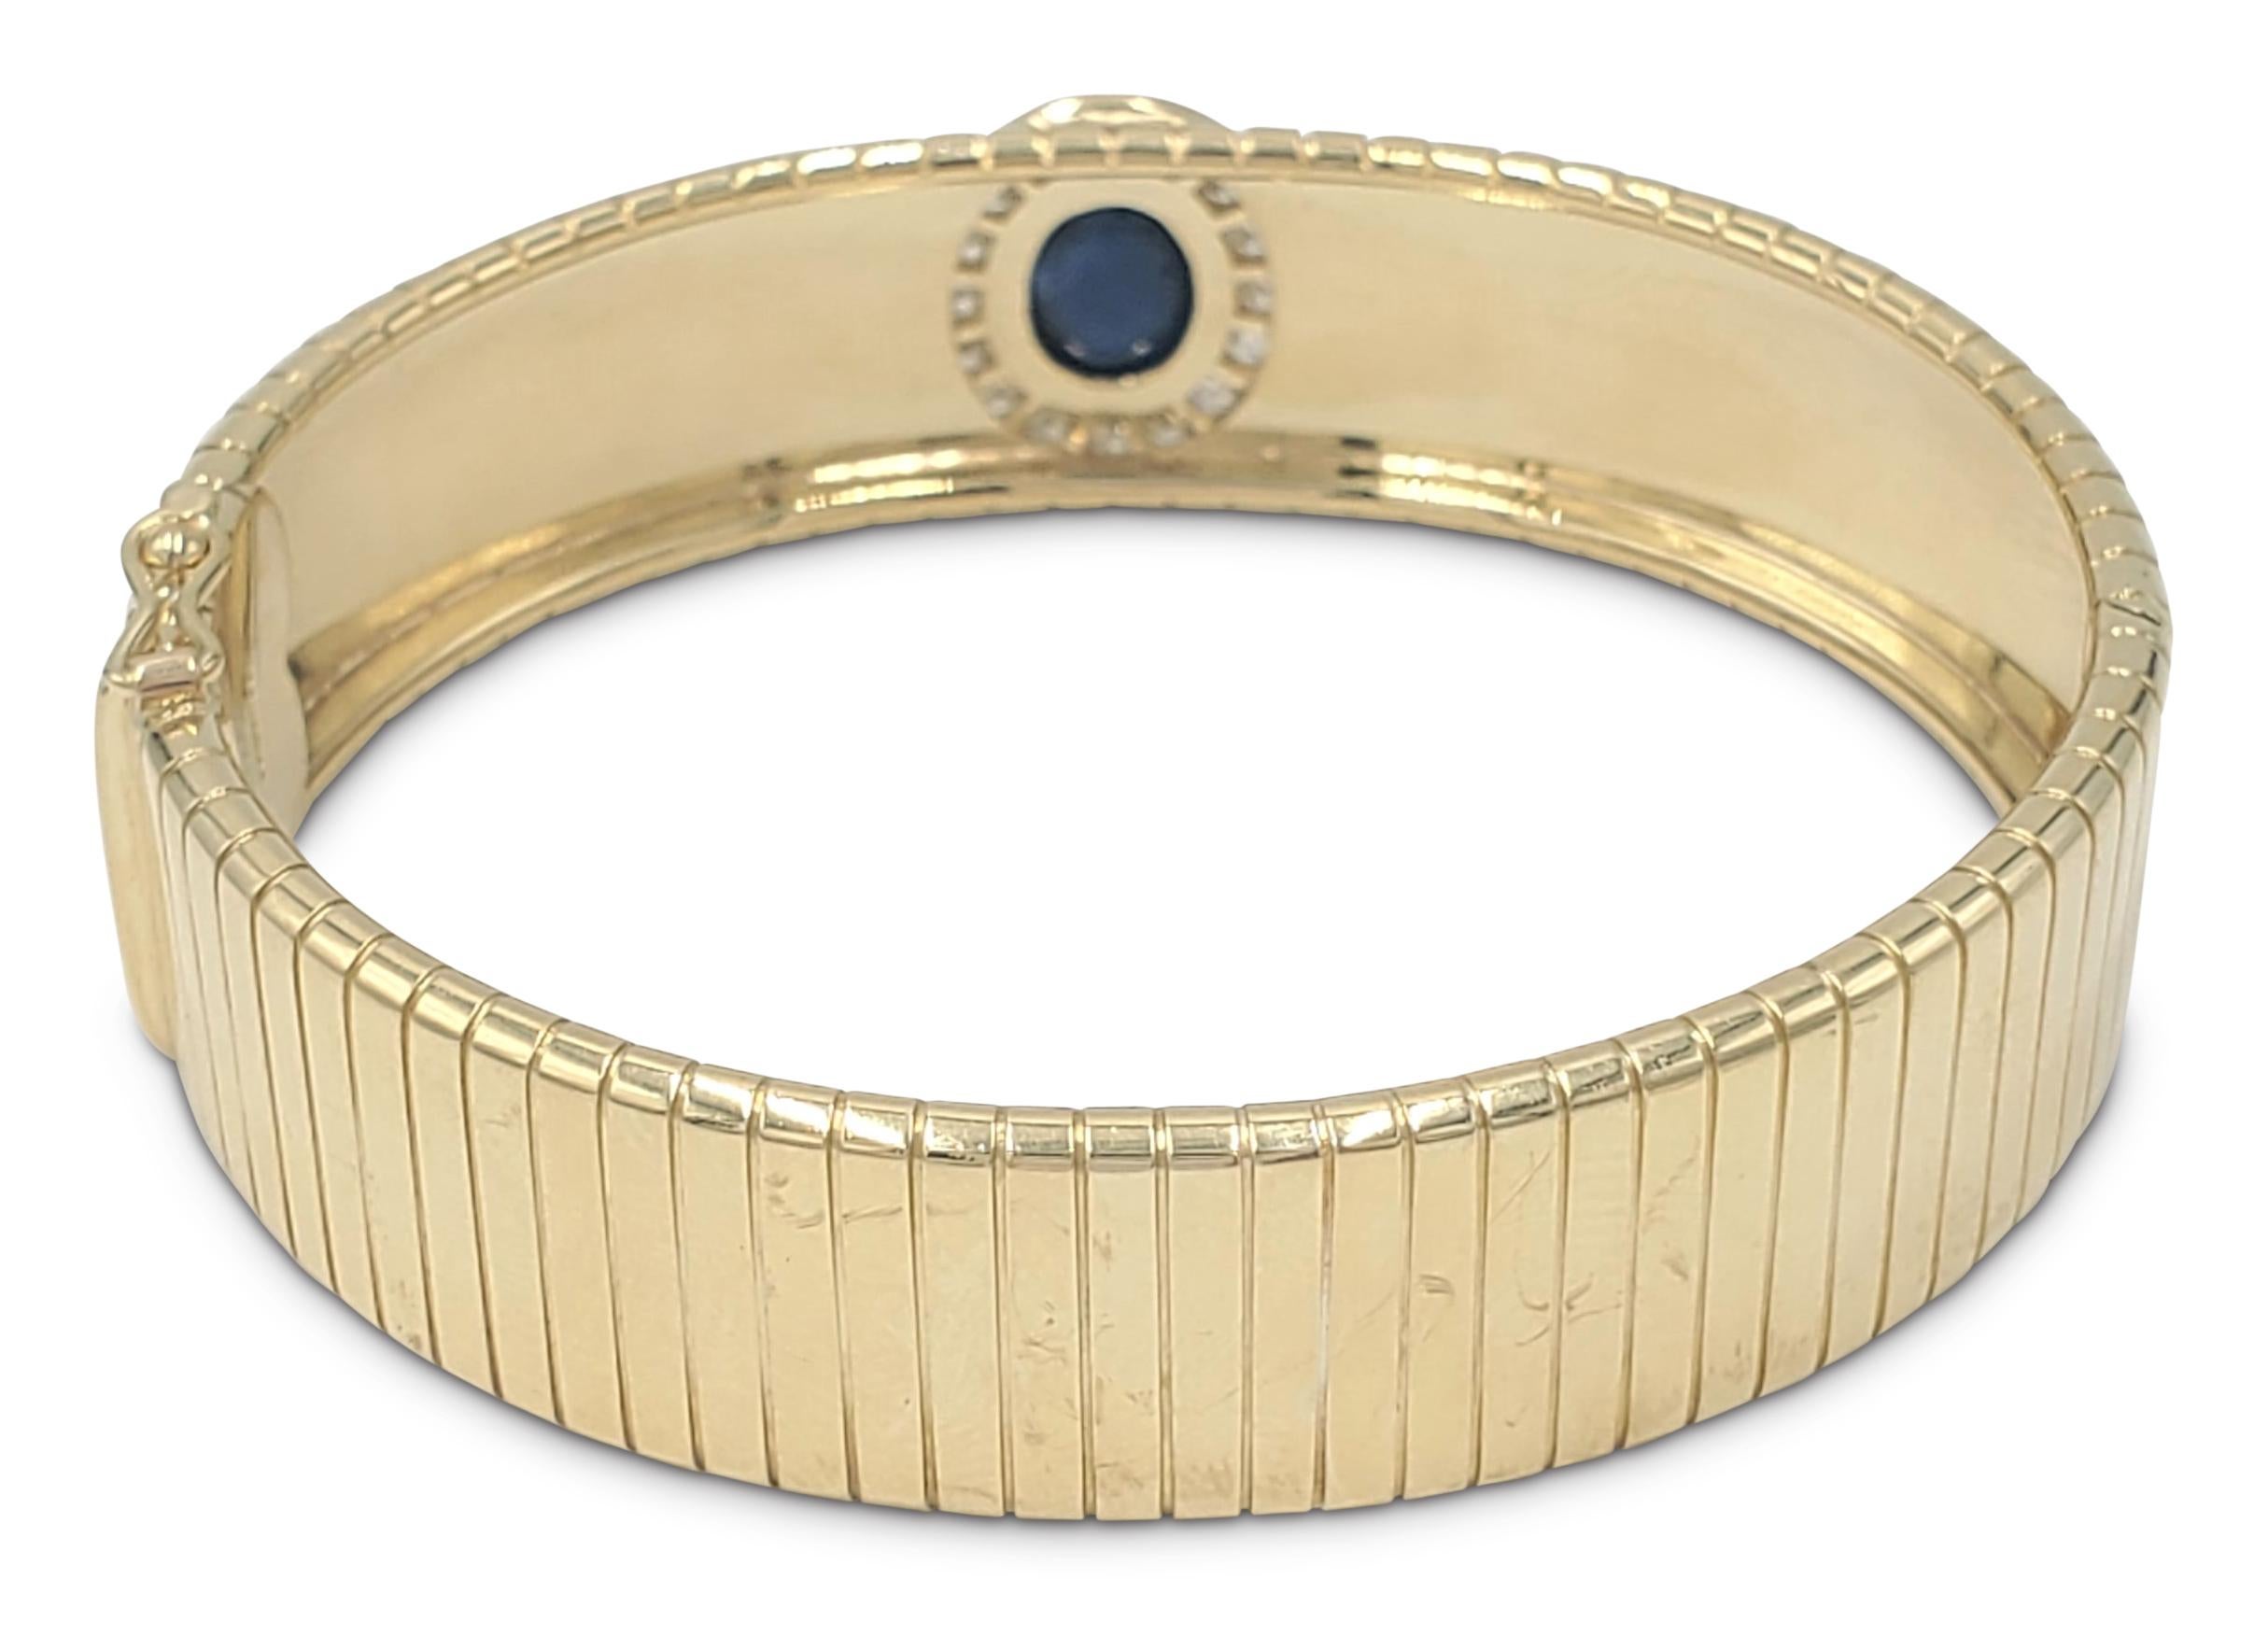 Gold Diamond and Sapphire Bangle, Signed Soler Cabot, Faberge 1